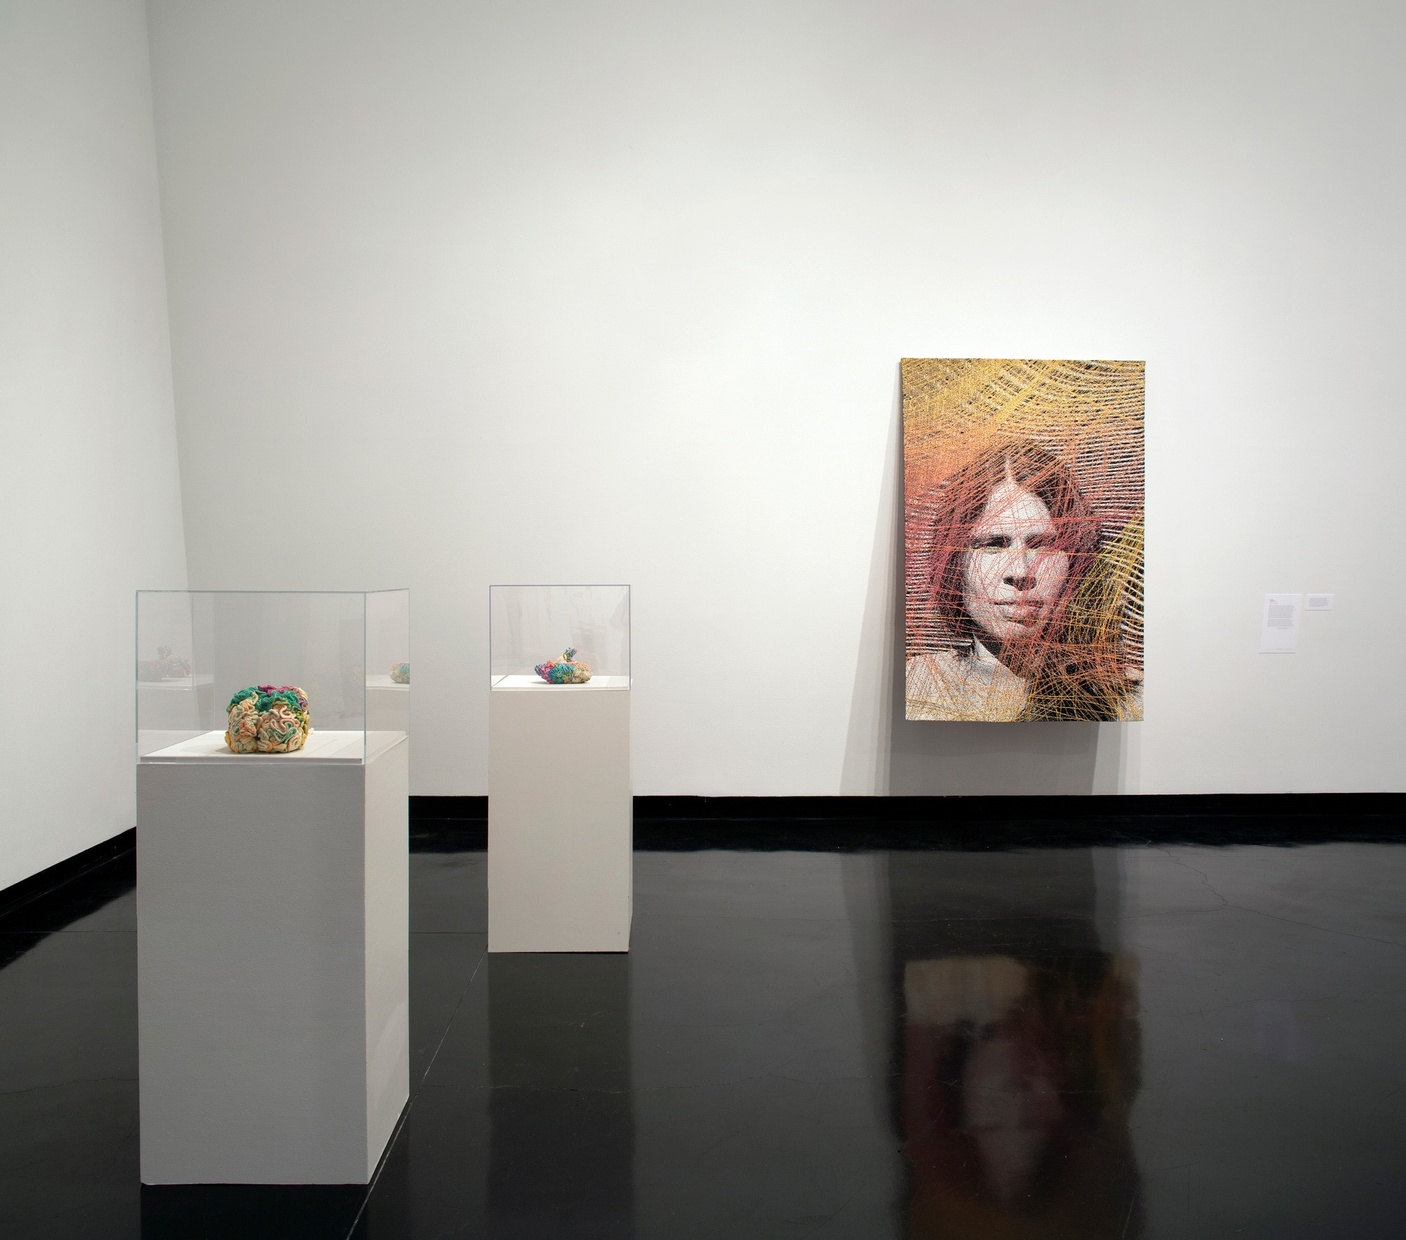 A view of artwork in a gallery with crochet brains in cases and a painting in the background.